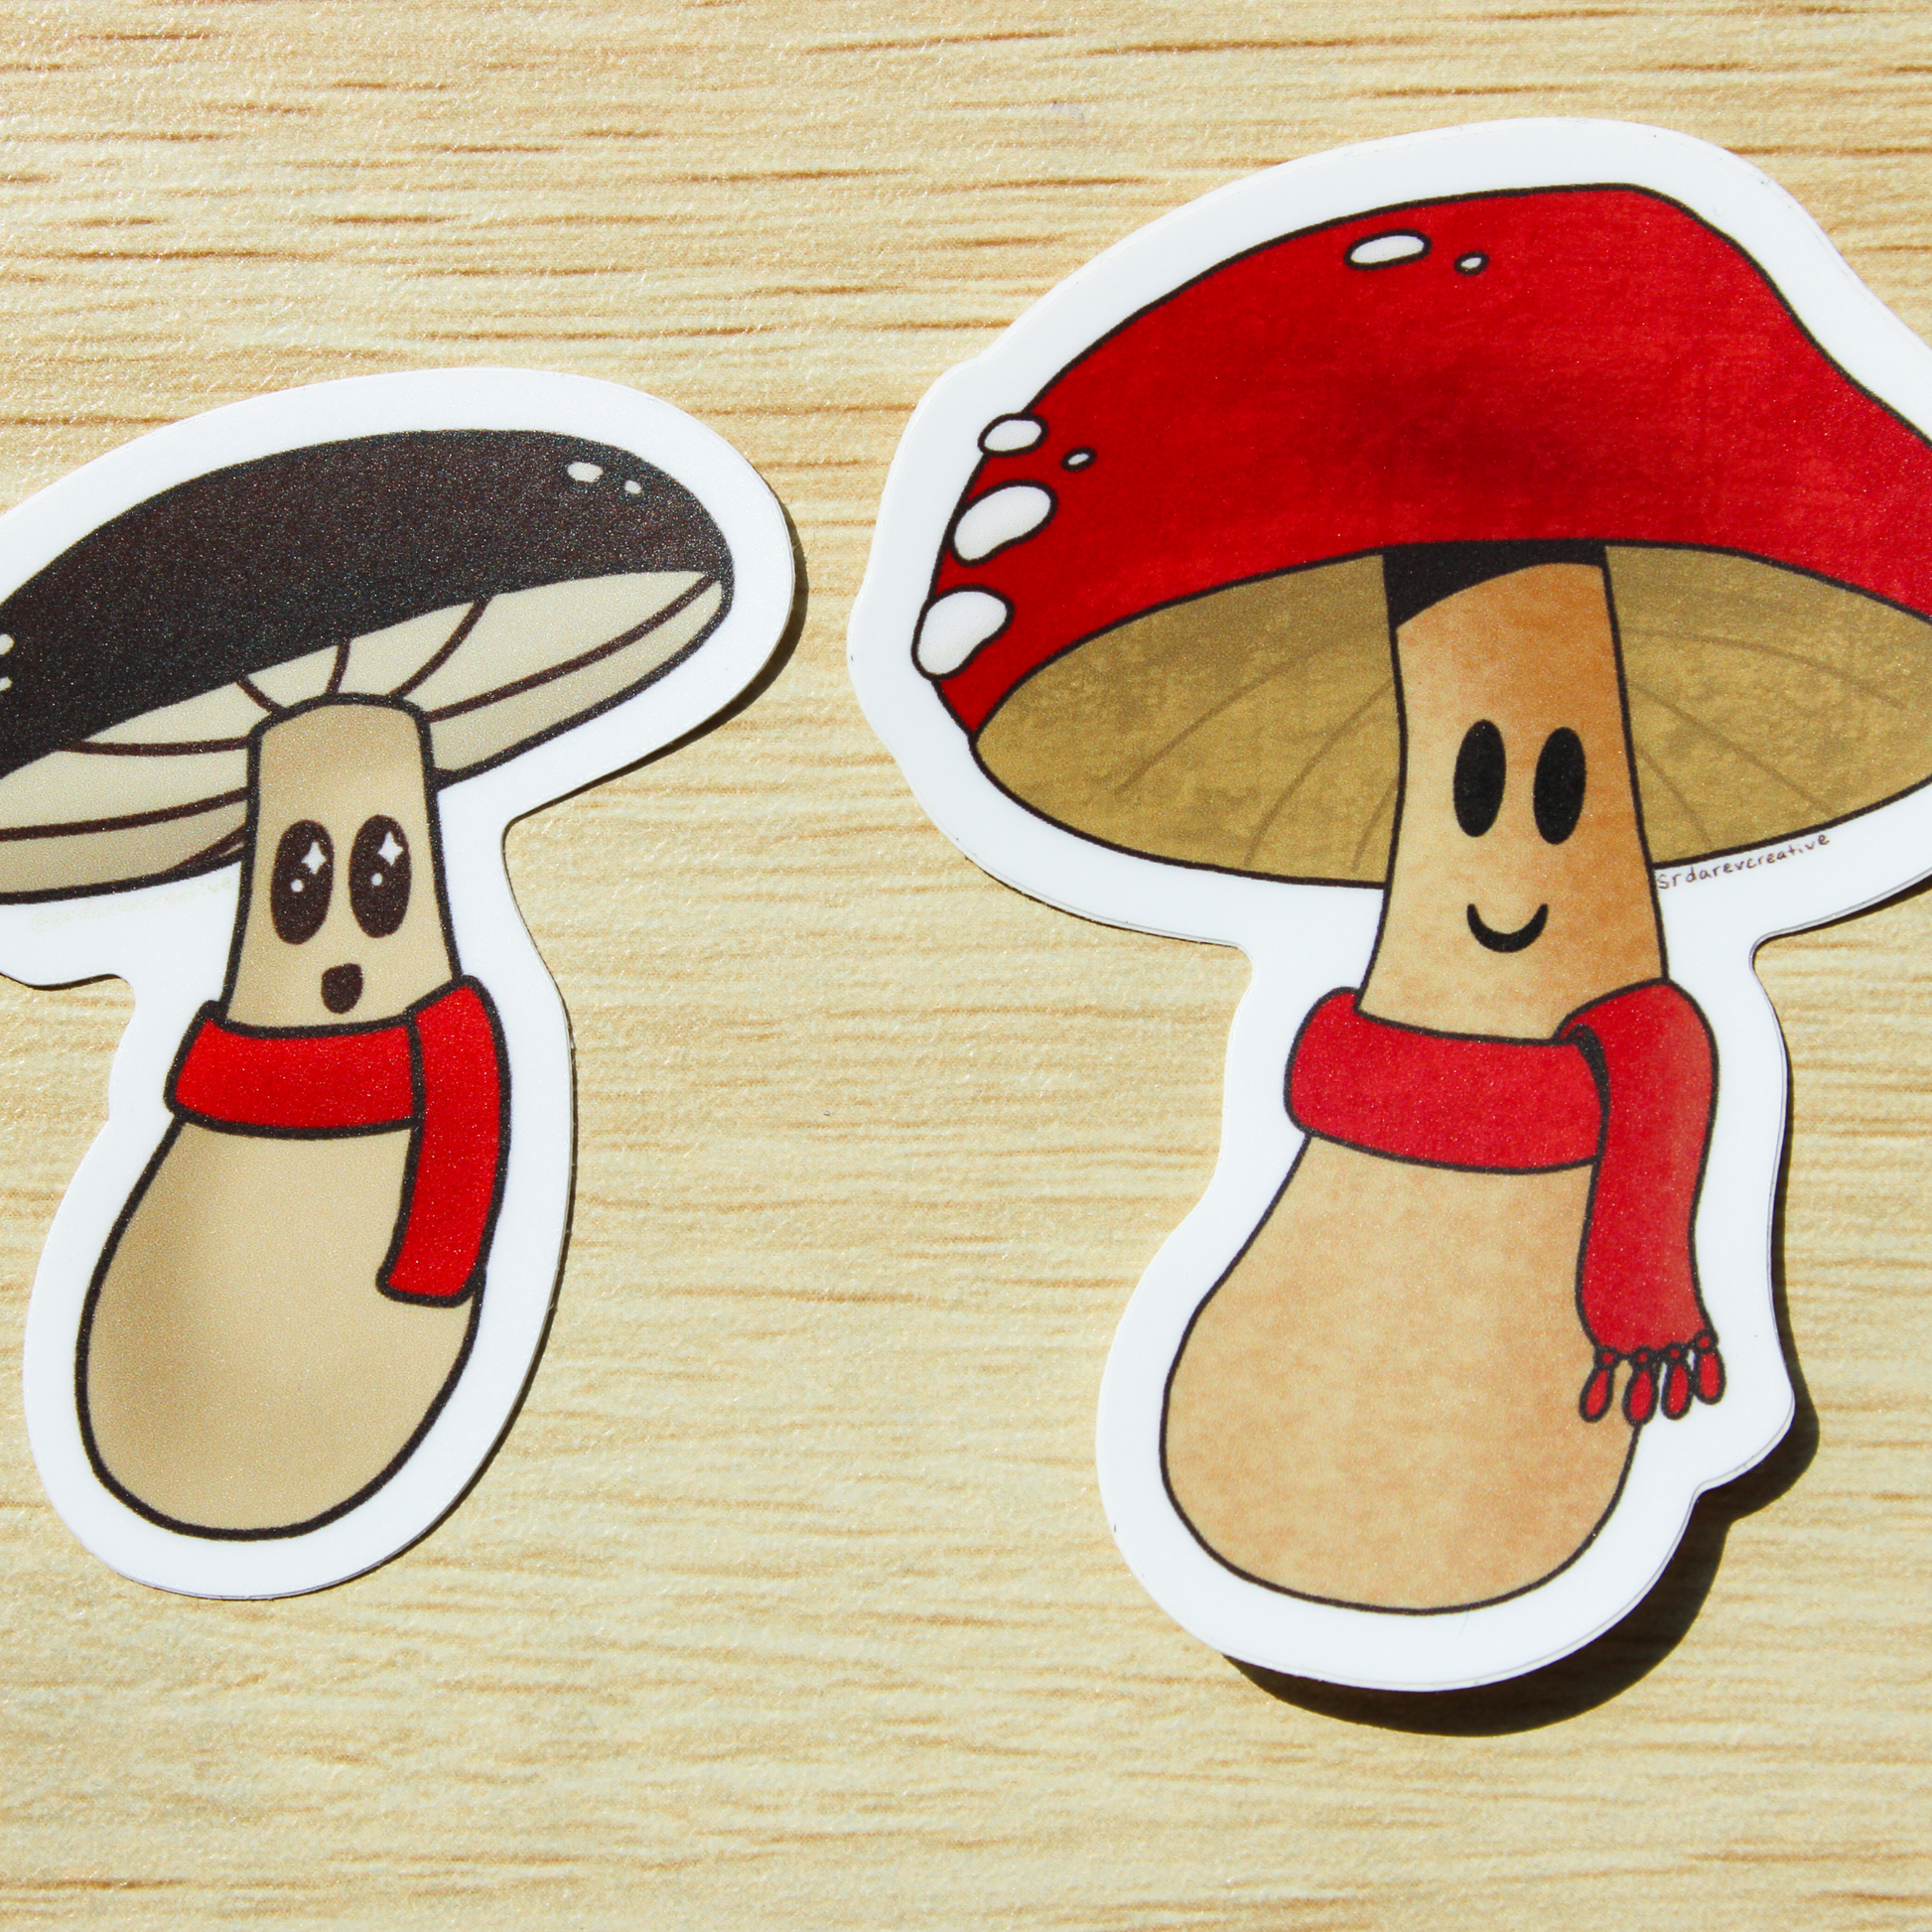 A brown wooden background. On top are two smiling mushroom stickers. On the left is a brown mushroom with a ref scarf and on the right is a red mushroom with a red scarf.